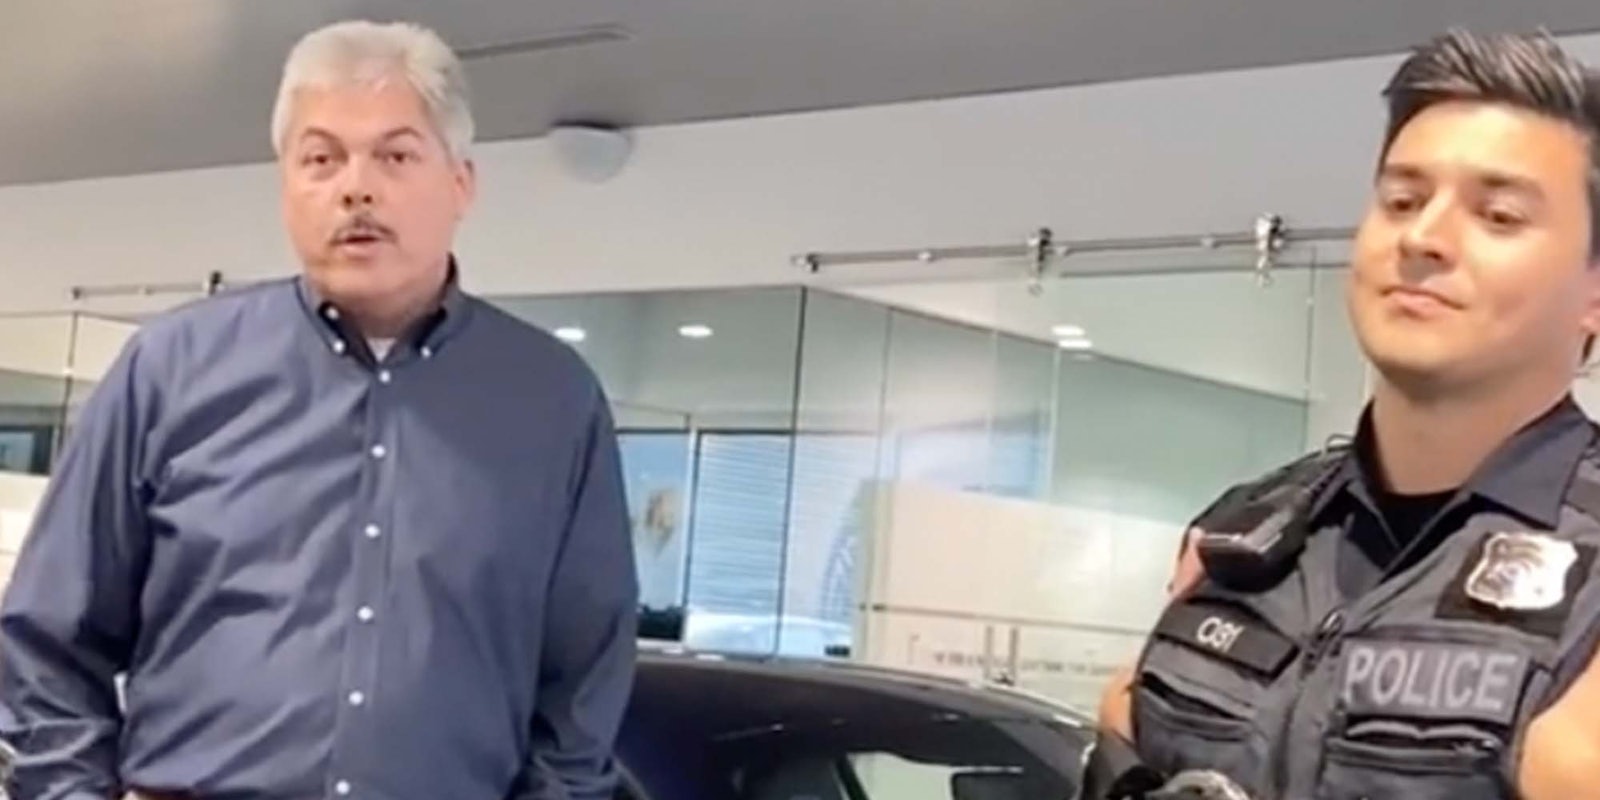 ‘Trying to buy a Porsche while Black’: TikToker says dealership workers discriminated against him